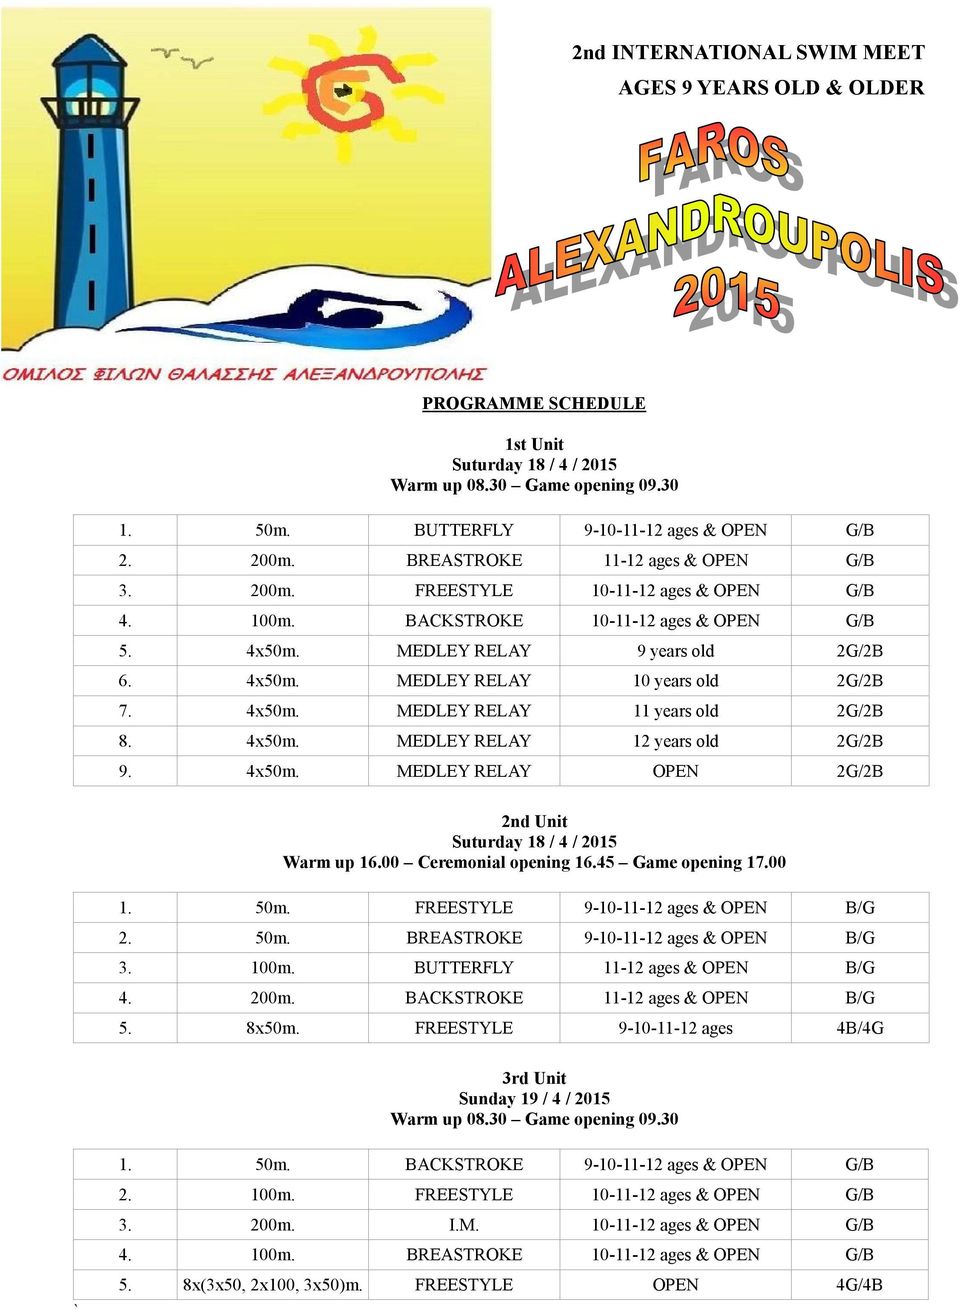 4x50m. MEDLEY RELAY 11 years old 2G/2B 8. 4x50m. MEDLEY RELAY 12 years old 2G/2B 9. 4x50m. MEDLEY RELAY OPEN 2G/2B 2nd Unit Suturday 18 / 4 / 2015 Warm up 16.00 Ceremonial opening 16.